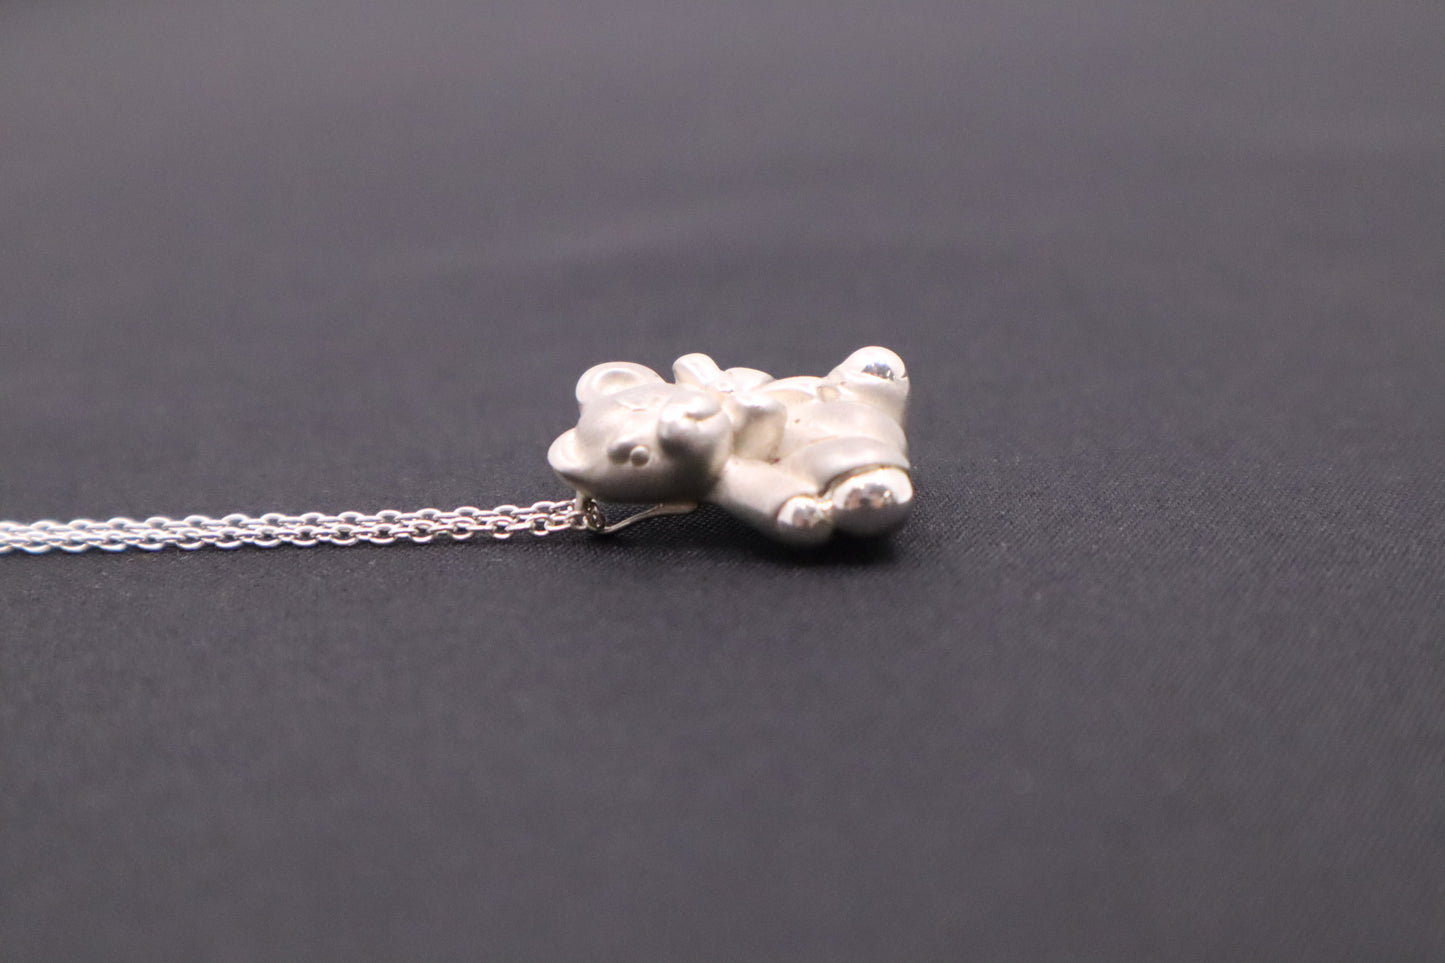 Tiffany &Co. Bear Necklace in Sterling Silver